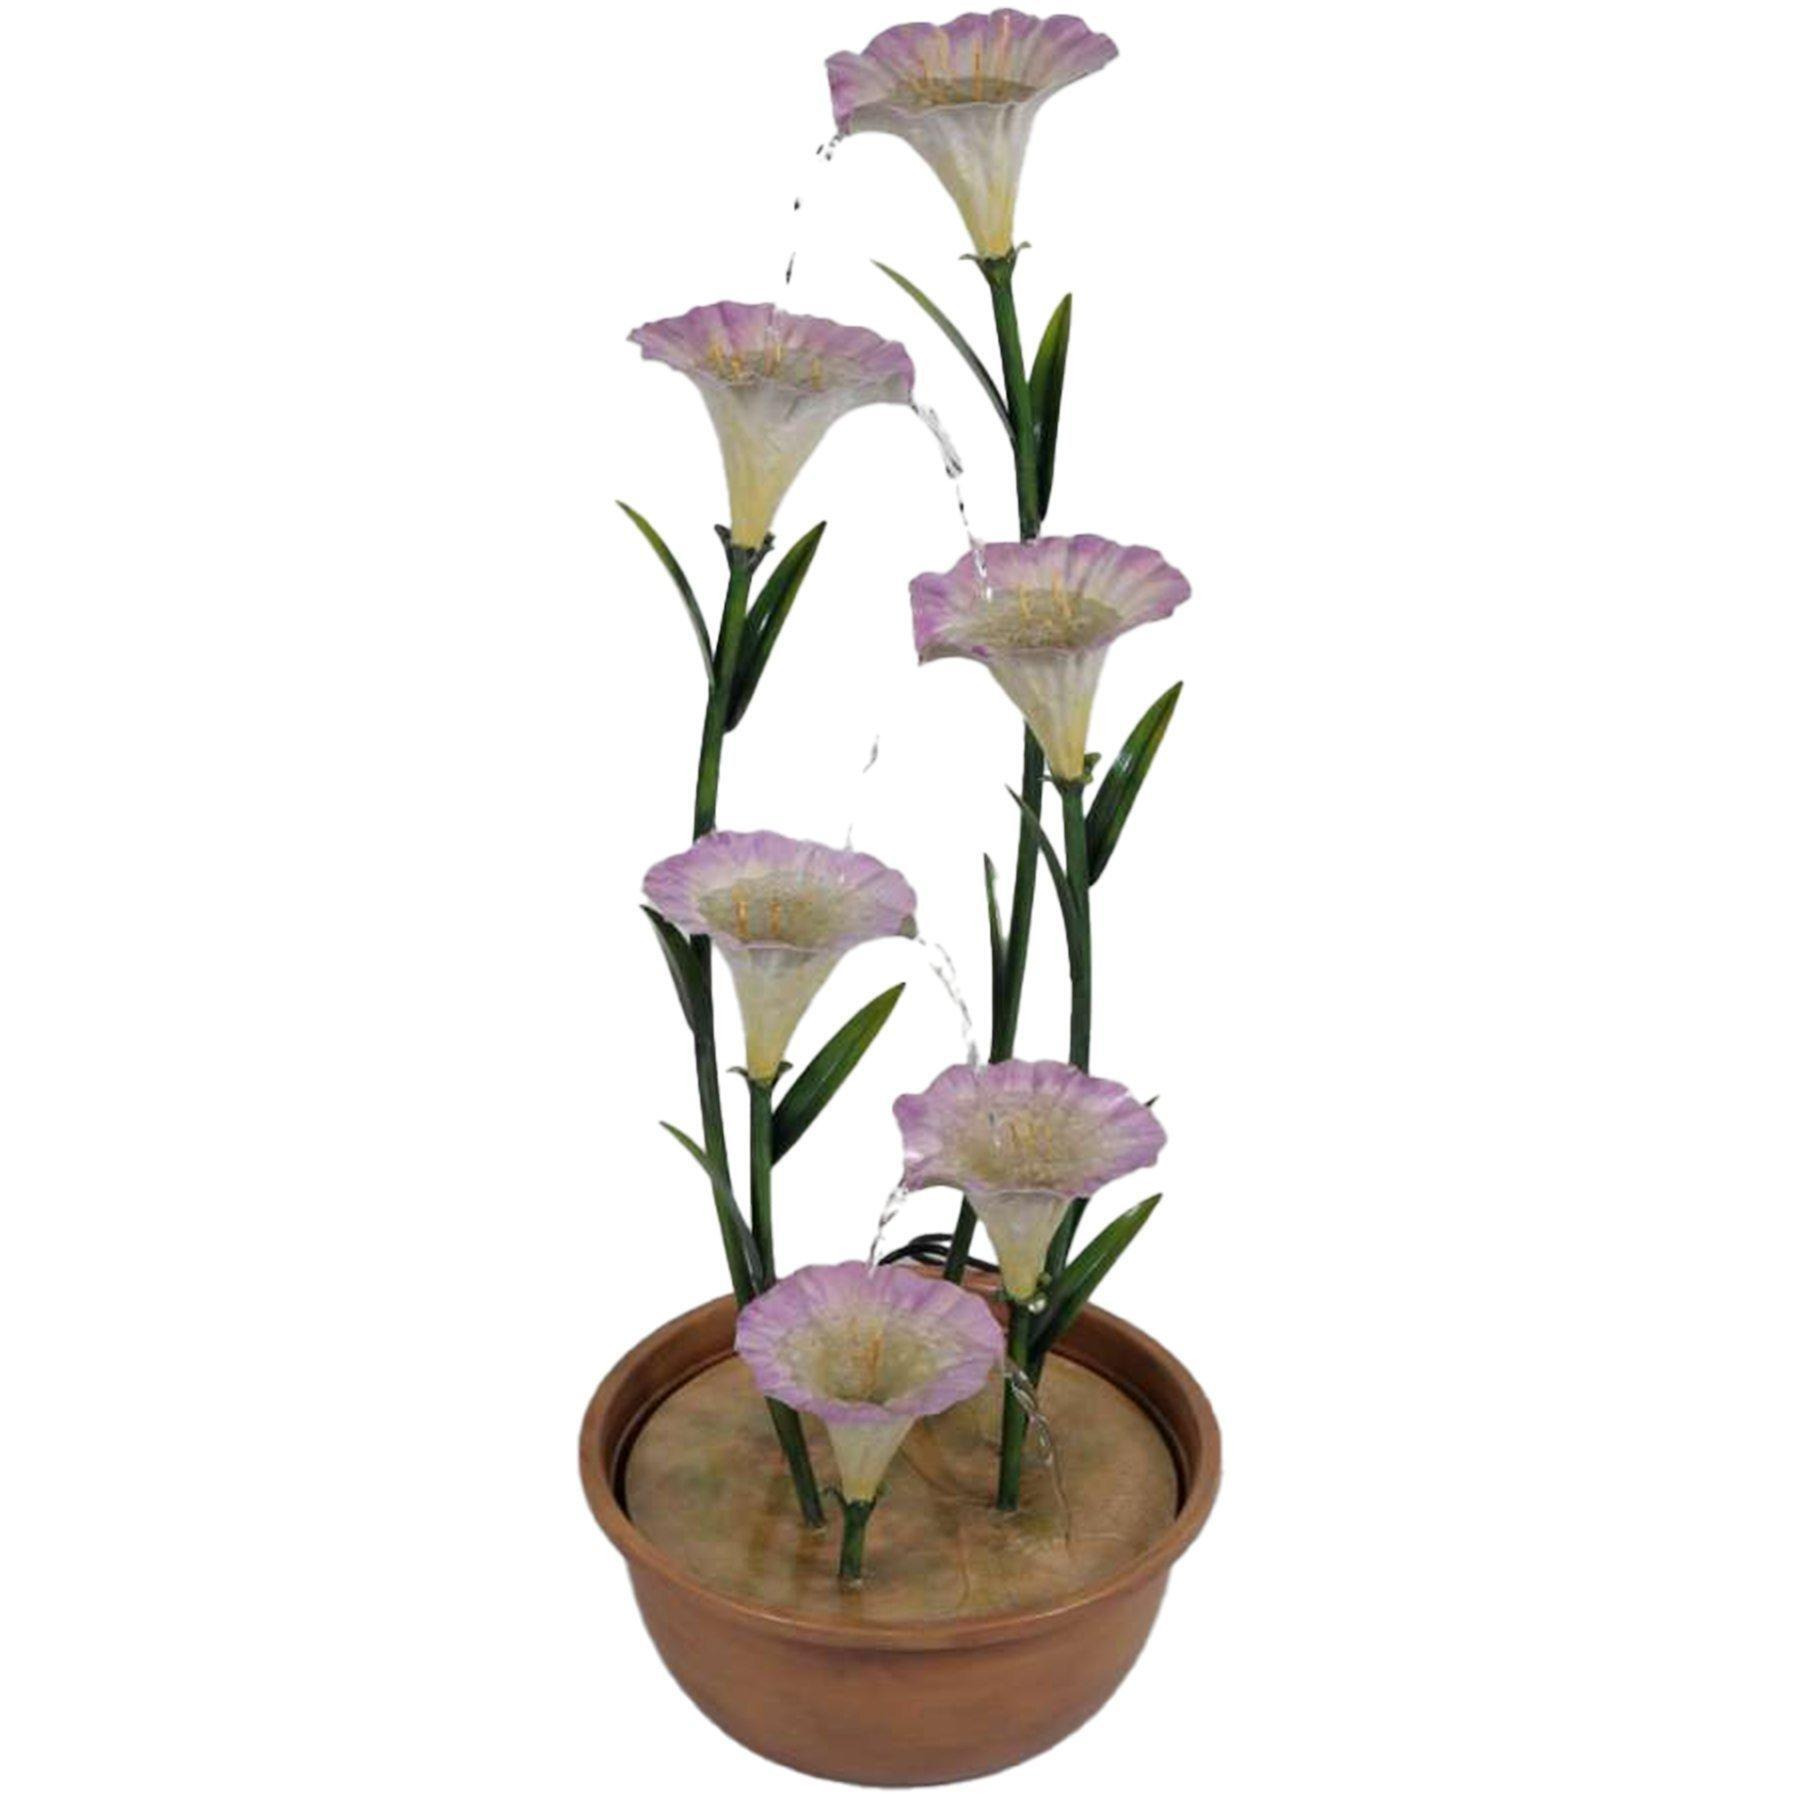 Potted Pink Lily Tiered Cascading Zinc Outdoor Garden Water Feature - image 1